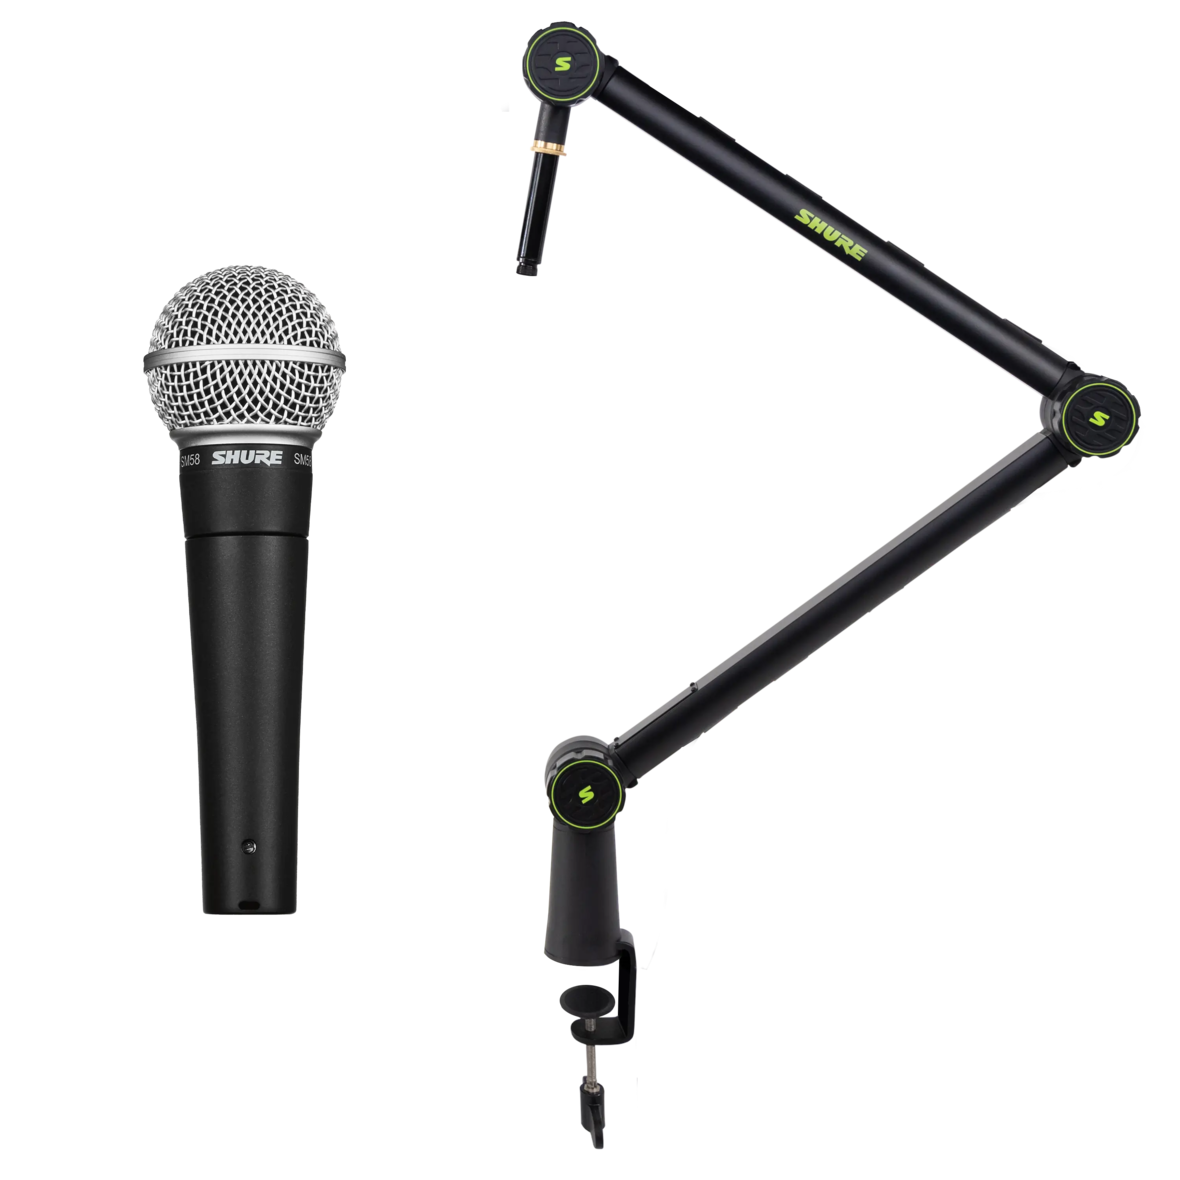 Shure SM58 Cardioid Dynamic Microphone & XLR Cable Bundle with Stand